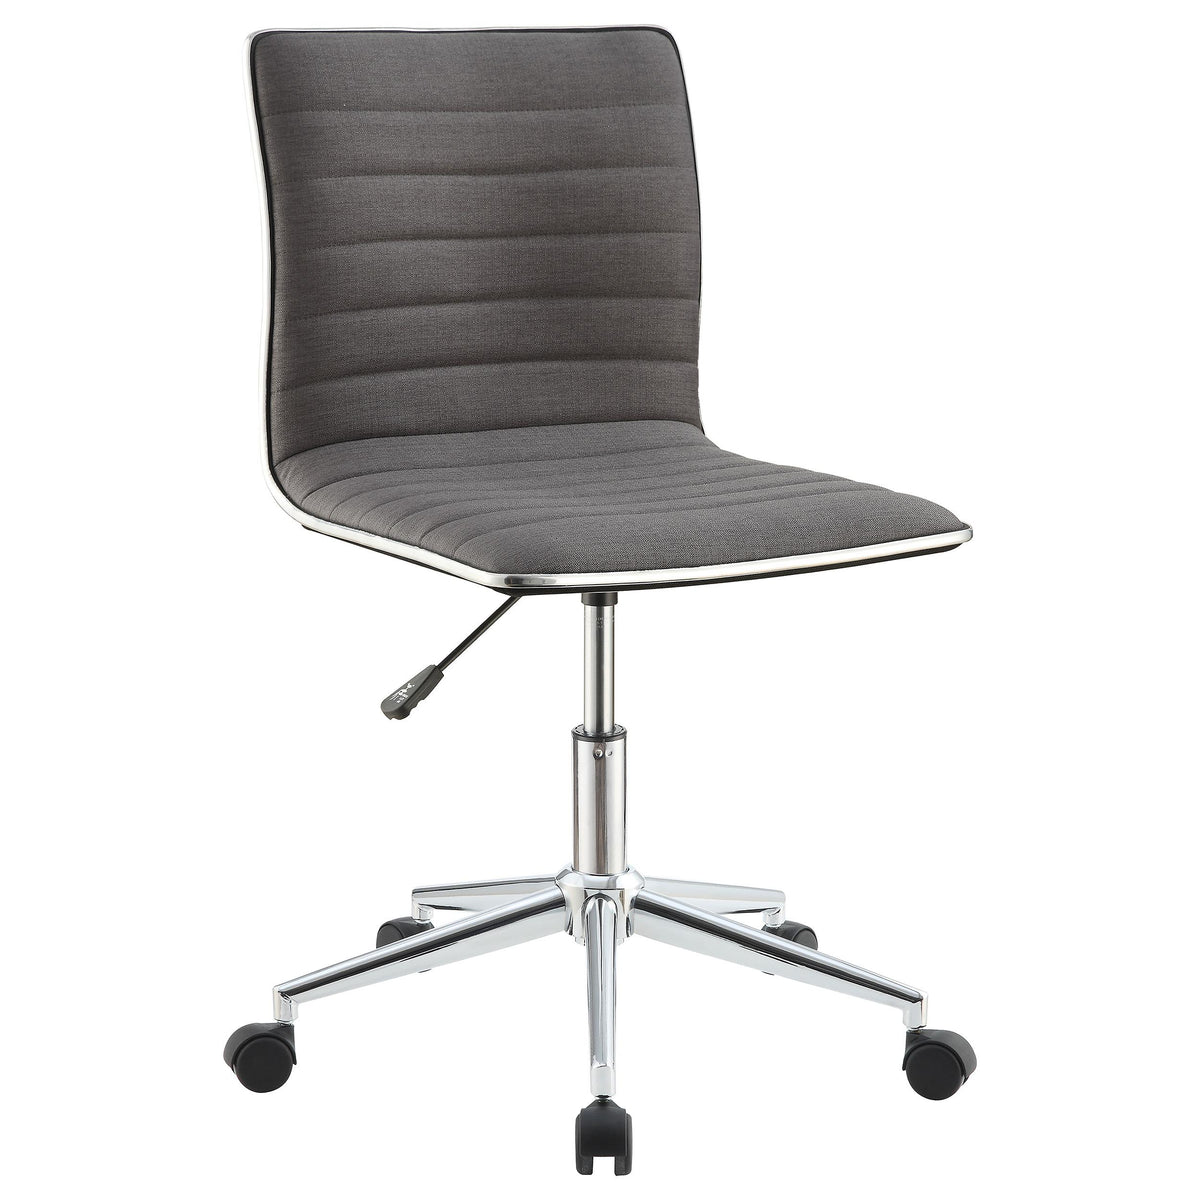 Chryses Adjustable Height Office Chair Grey and Chrome  Las Vegas Furniture Stores